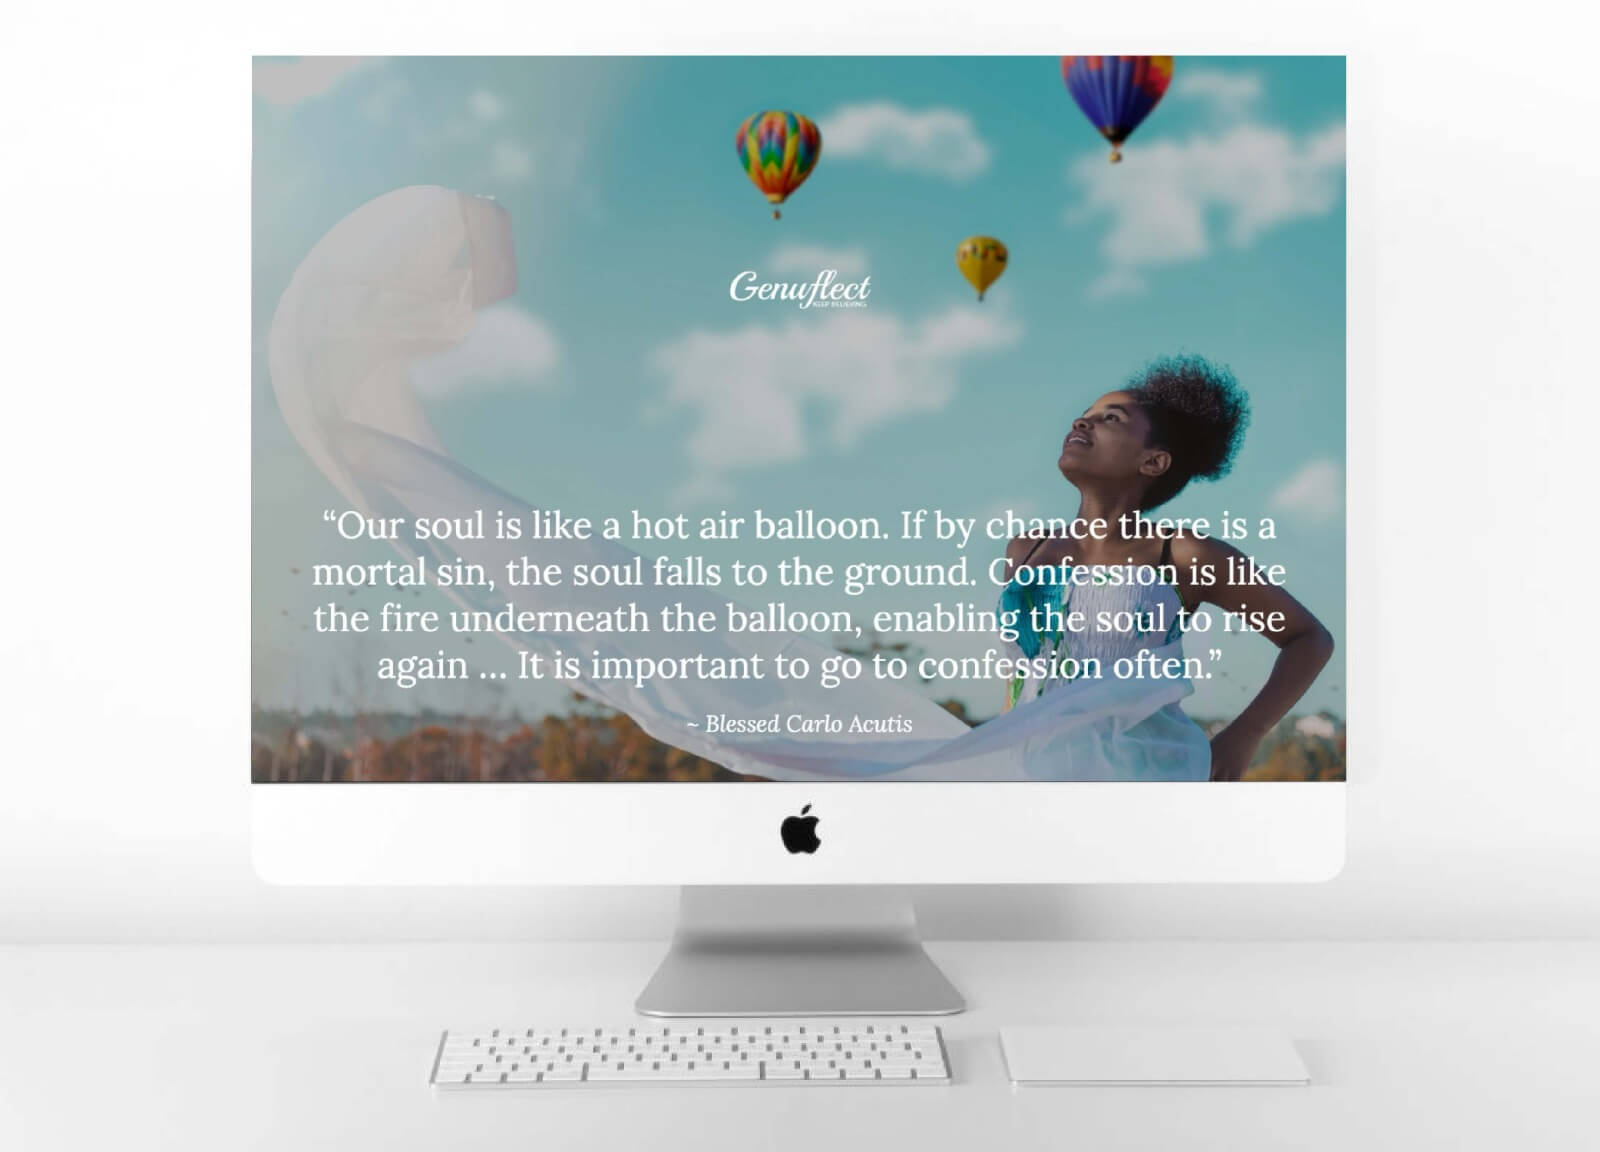 Genuflect computer background image of a Woman looking up to the sky filled with hot air balloons